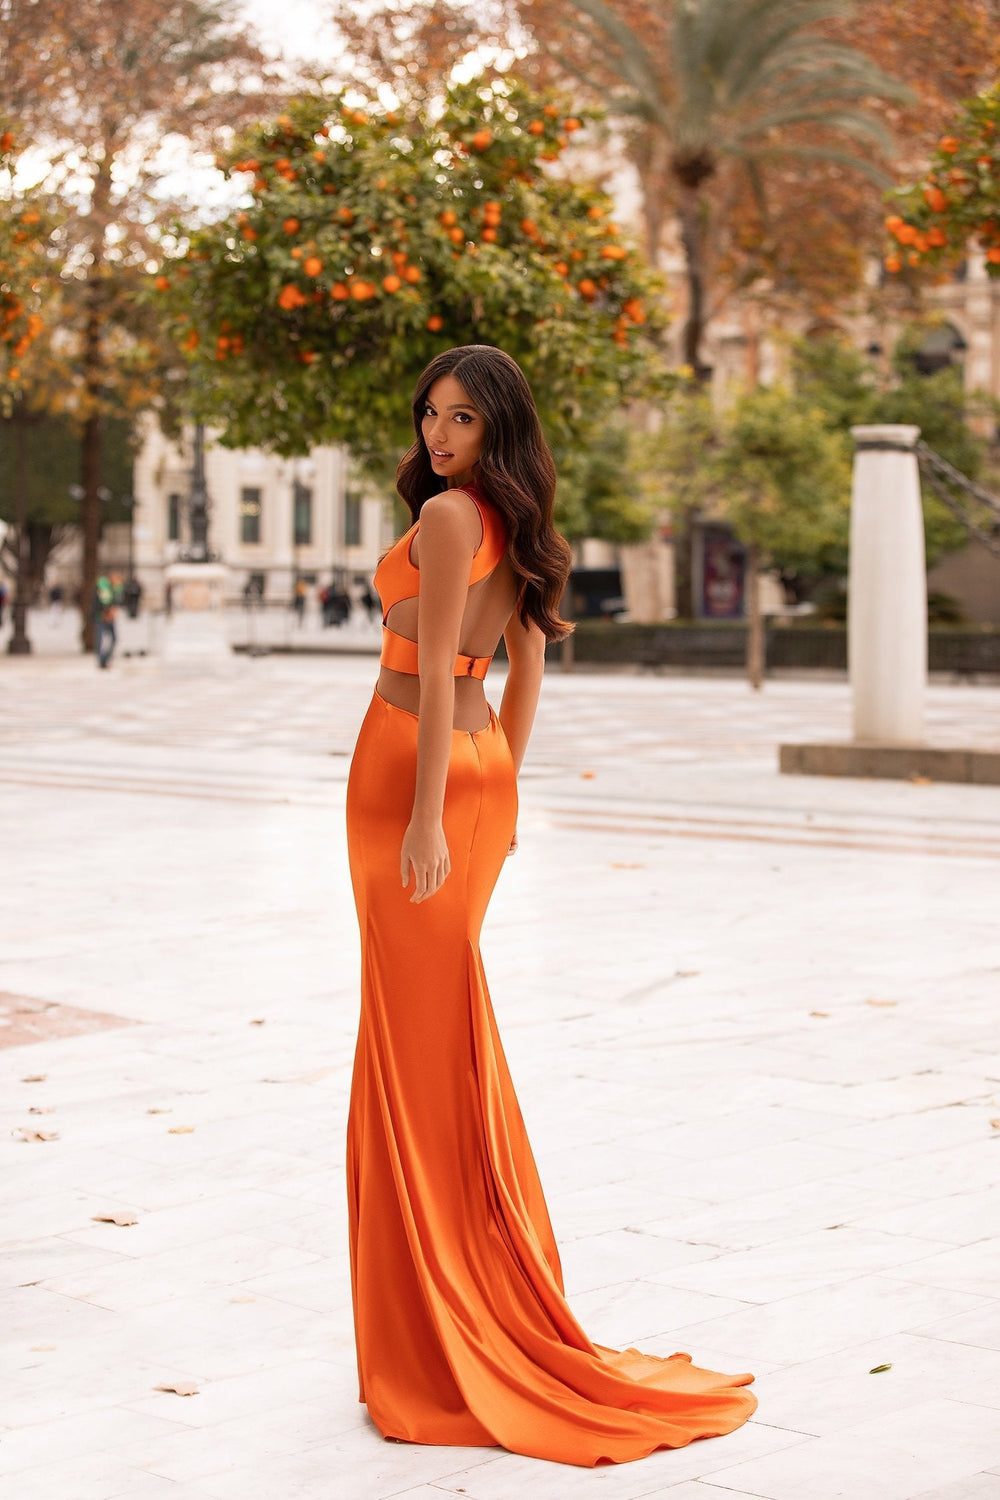 Alondra - Orange Satin Mermaid Gown with Plunge Neck & Cut Out Details